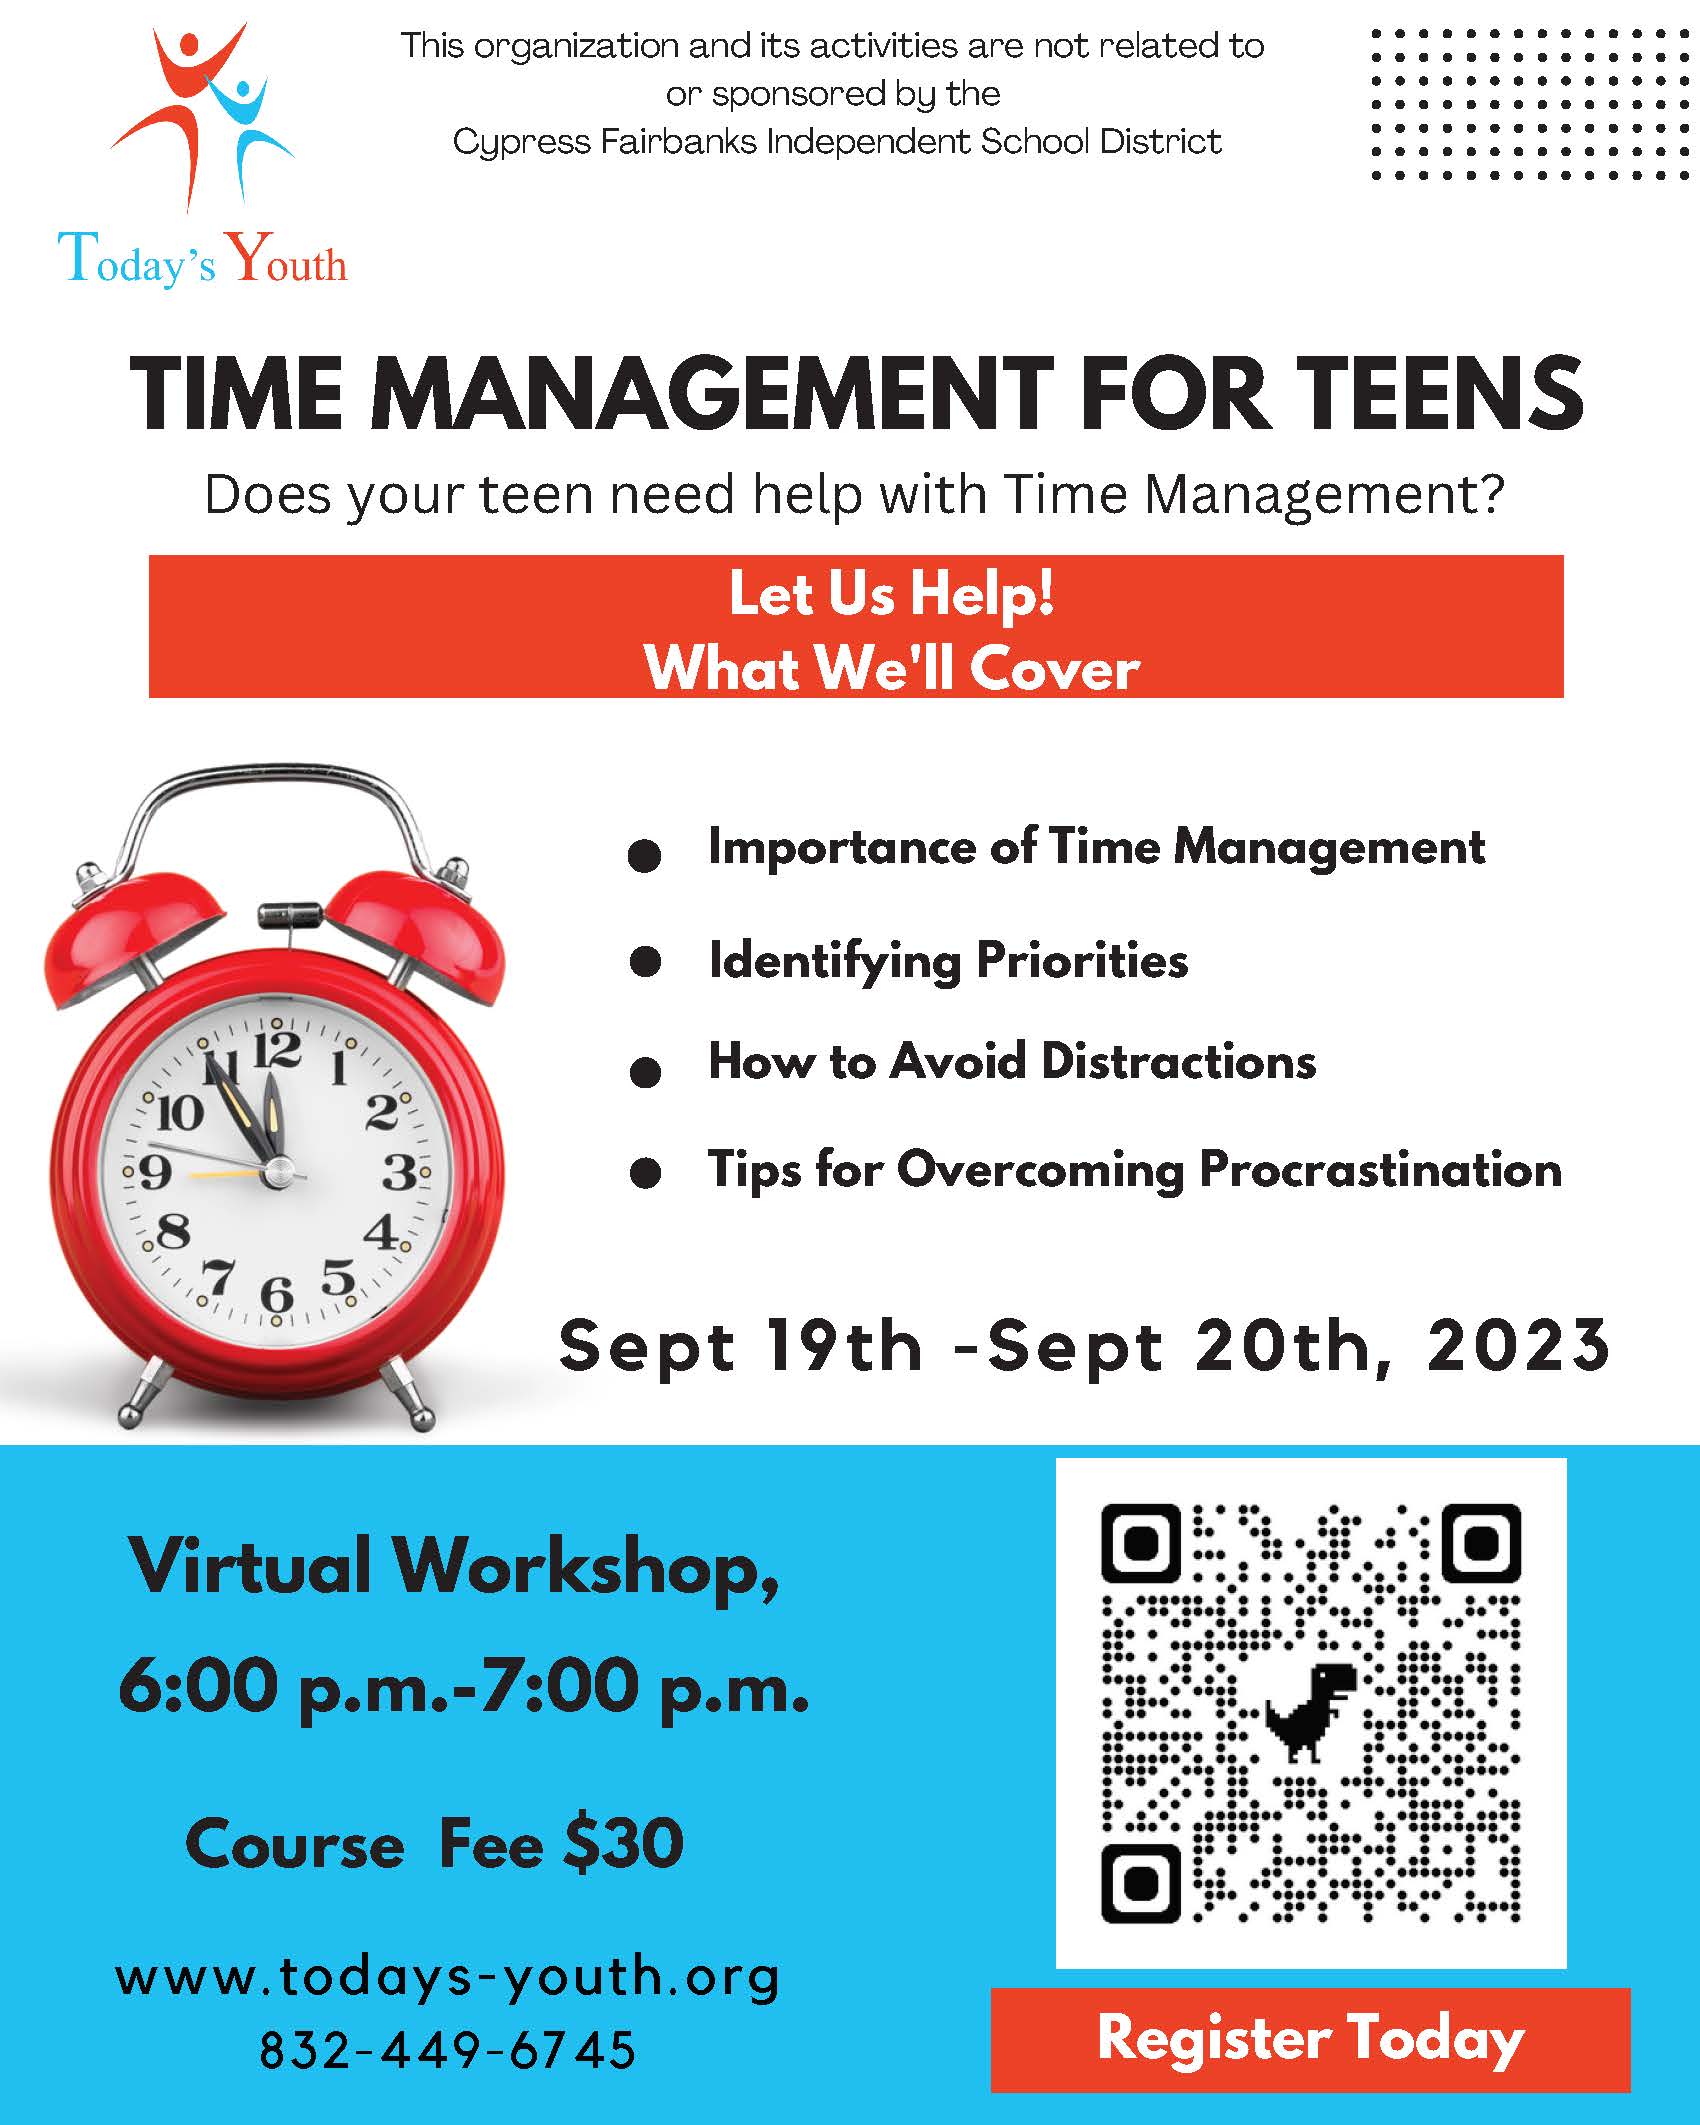 Today's Youth - Time Management for Teens  Does your teen need help with Time Management? Let Us Help! What We'll Cover:  Importance of Time Management Identifying Priorities How to Avoid Distractions Tips for Overcoming Procrastination  Virtual Workshop on Sept. 19 & 20 from 6-7 p.m. www.todays-youth.org  |  832-449-6745    This activity is not related to or sponsored by the Cypress-Fairbanks Independent School District.